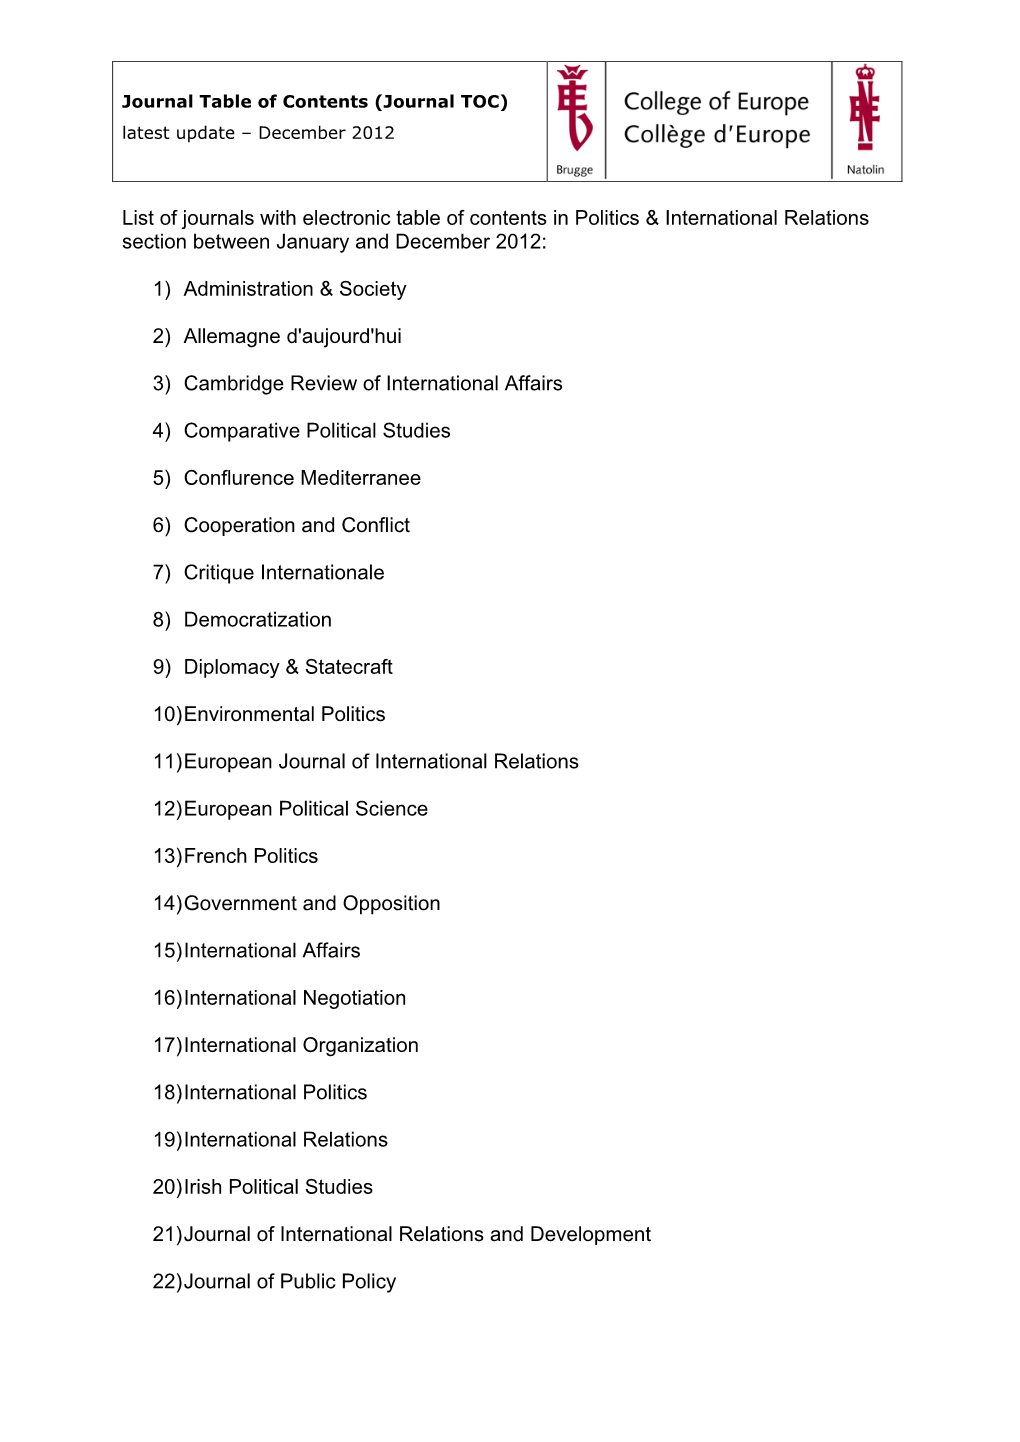 List of Journals with Electronic Table of Contents in Politics & International